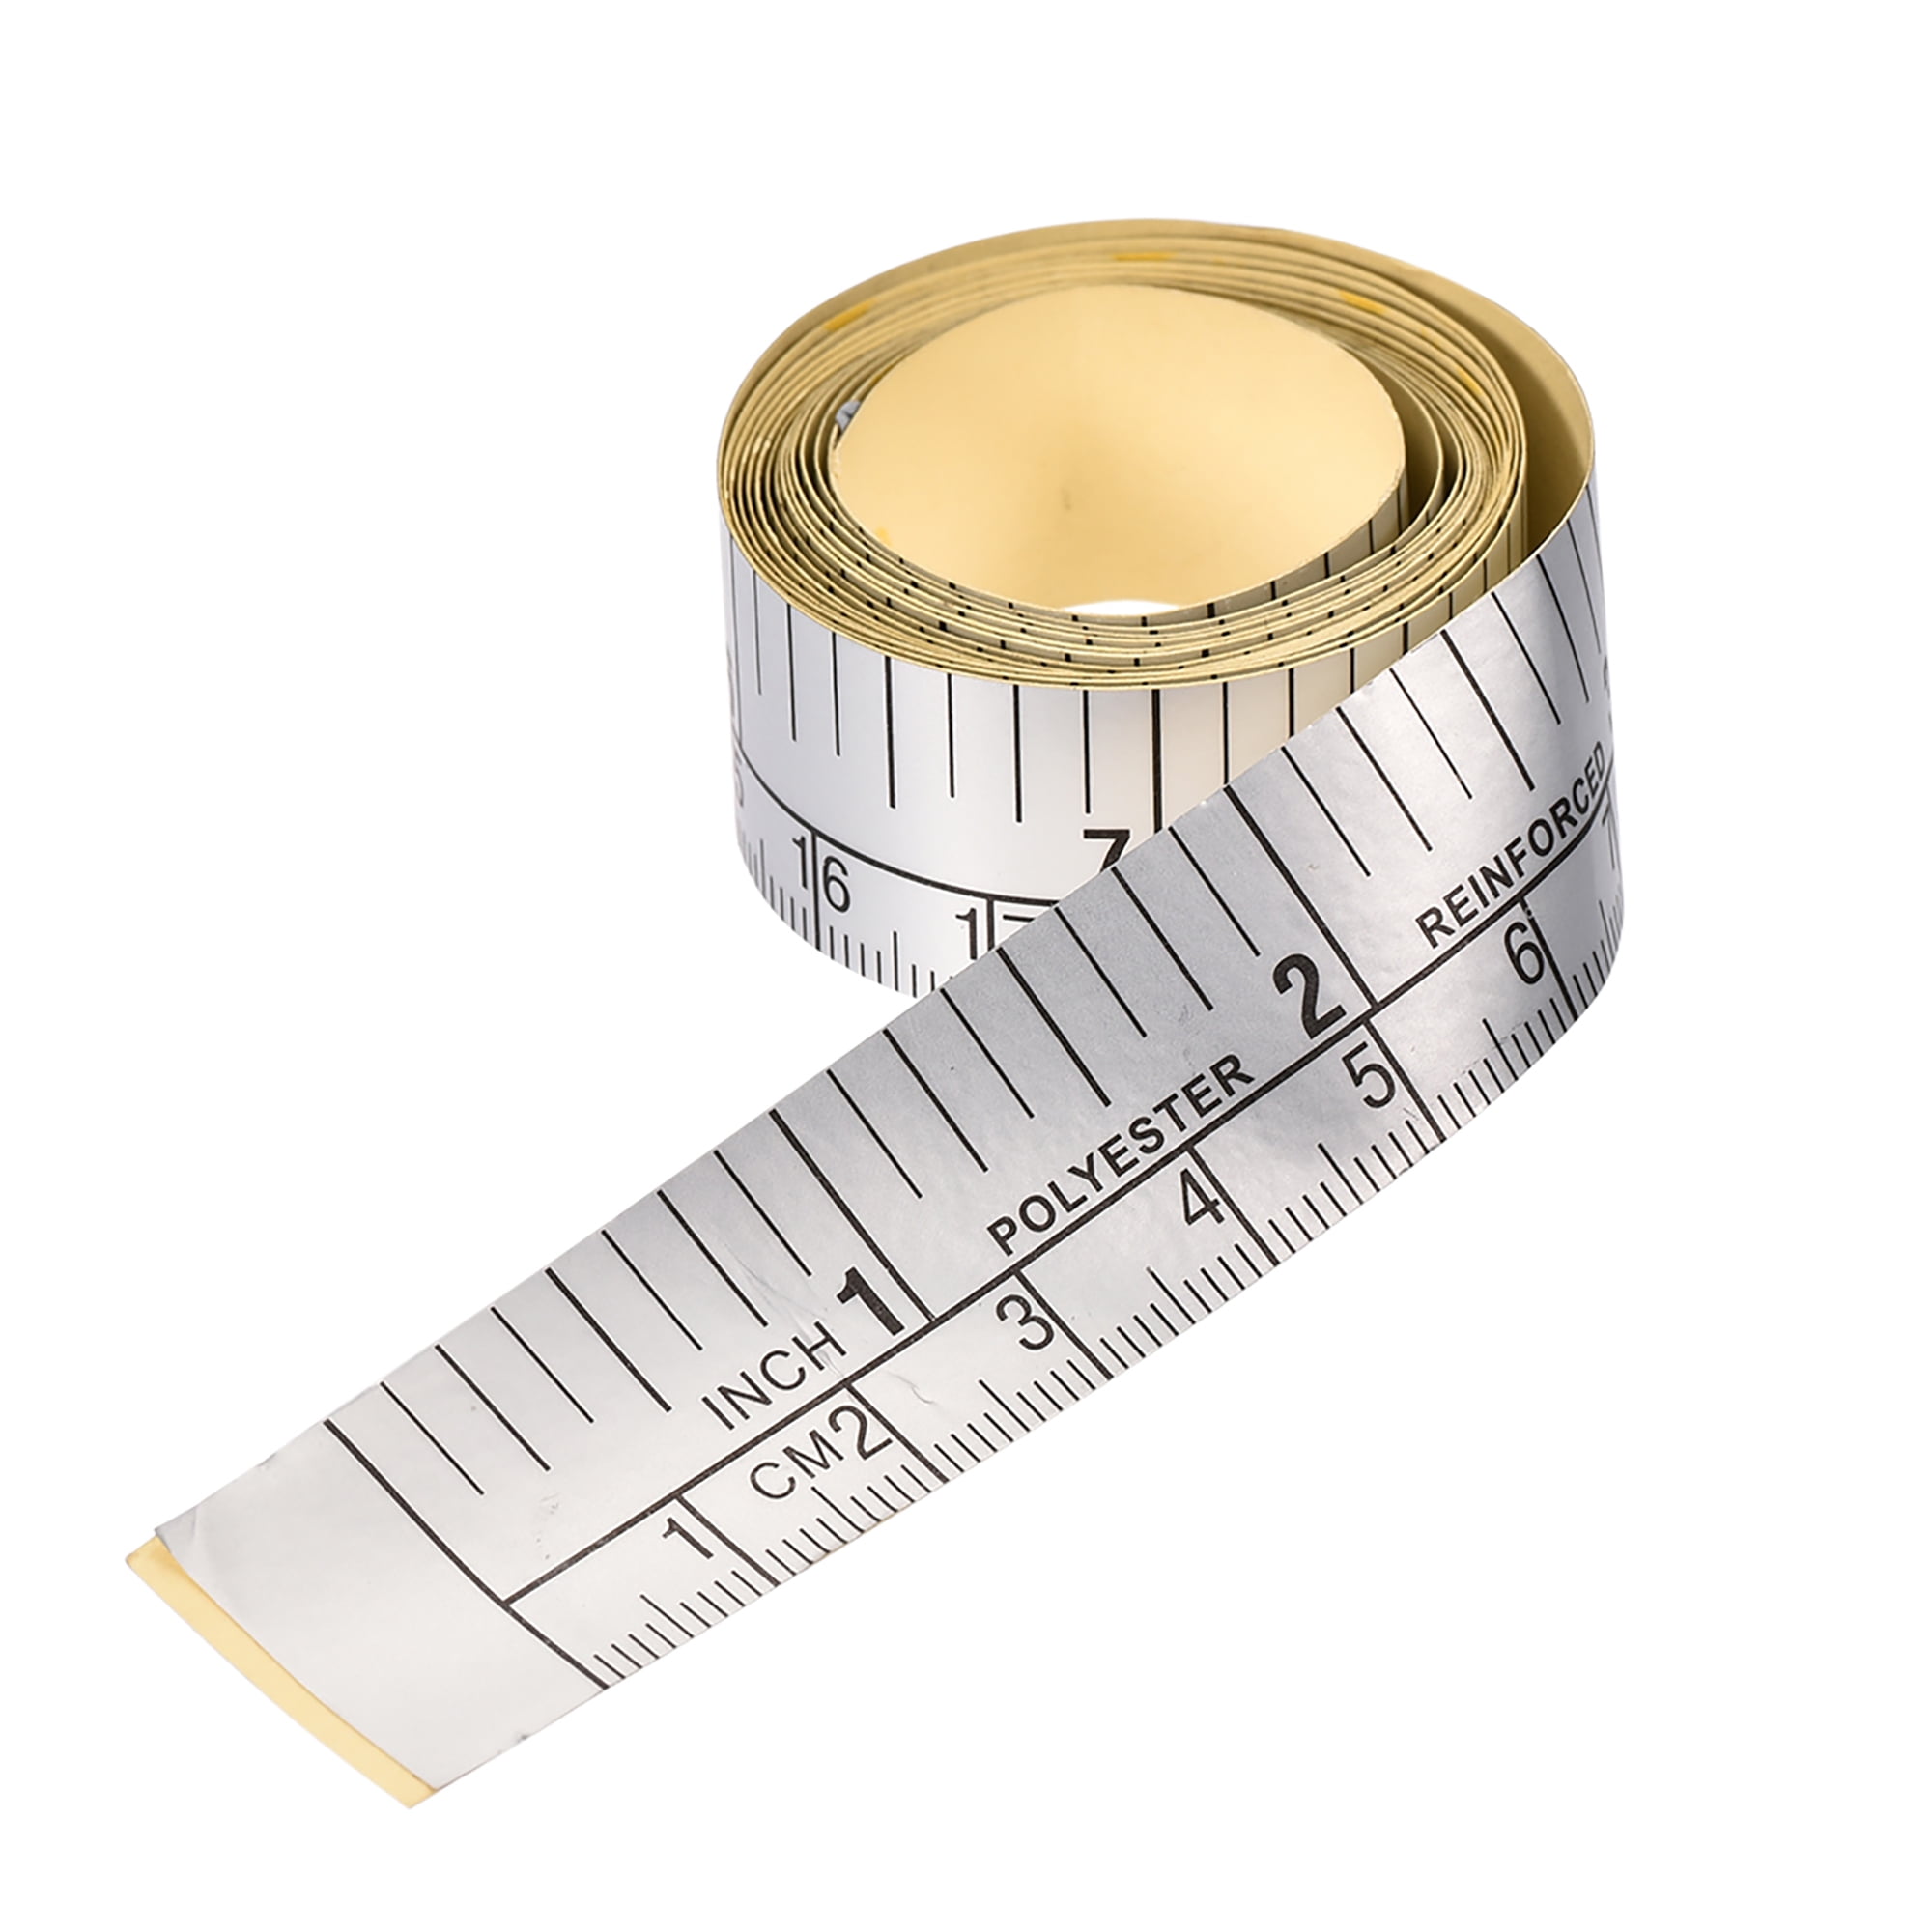 Tape Measure for Inches, Centimeter, and Millimeter Stock Image - Image of  measurements, craftsmanship: 124656261